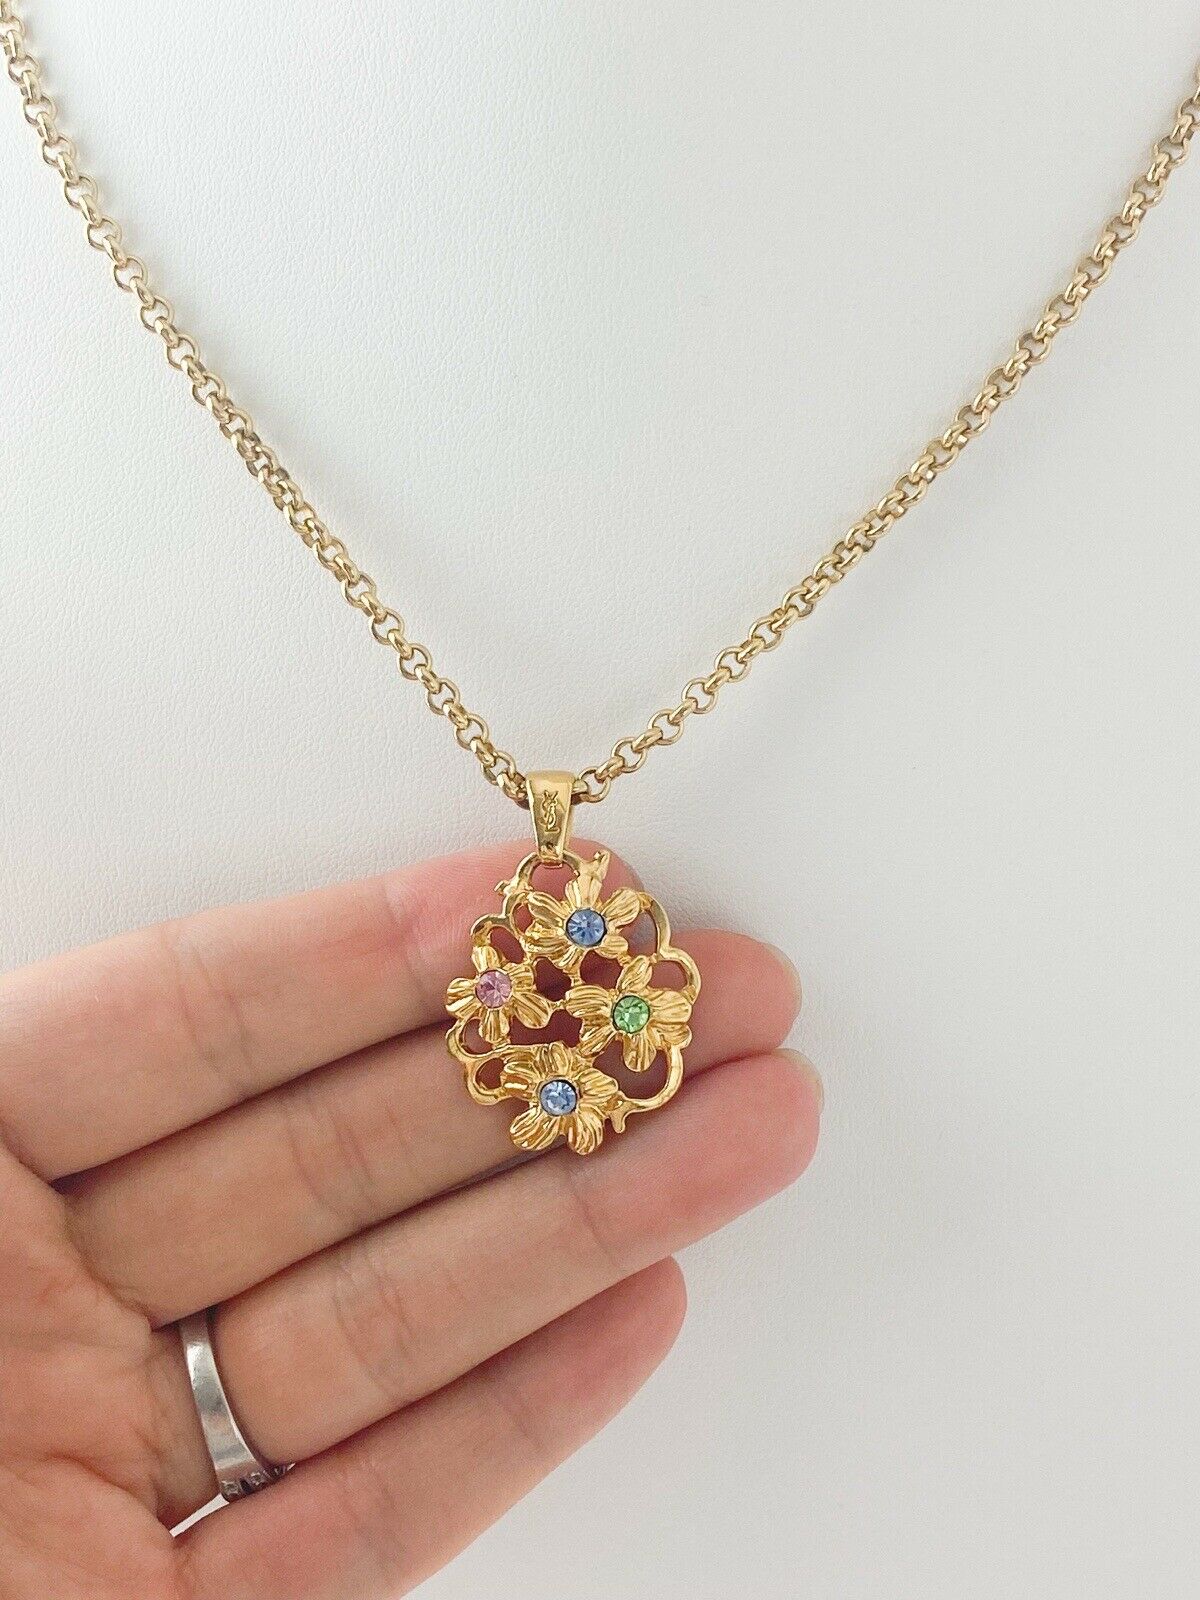 【SOLD OUT】YSL Yves Saint Laurent Vintage Gold Tone Flower Necklace Rhinestones